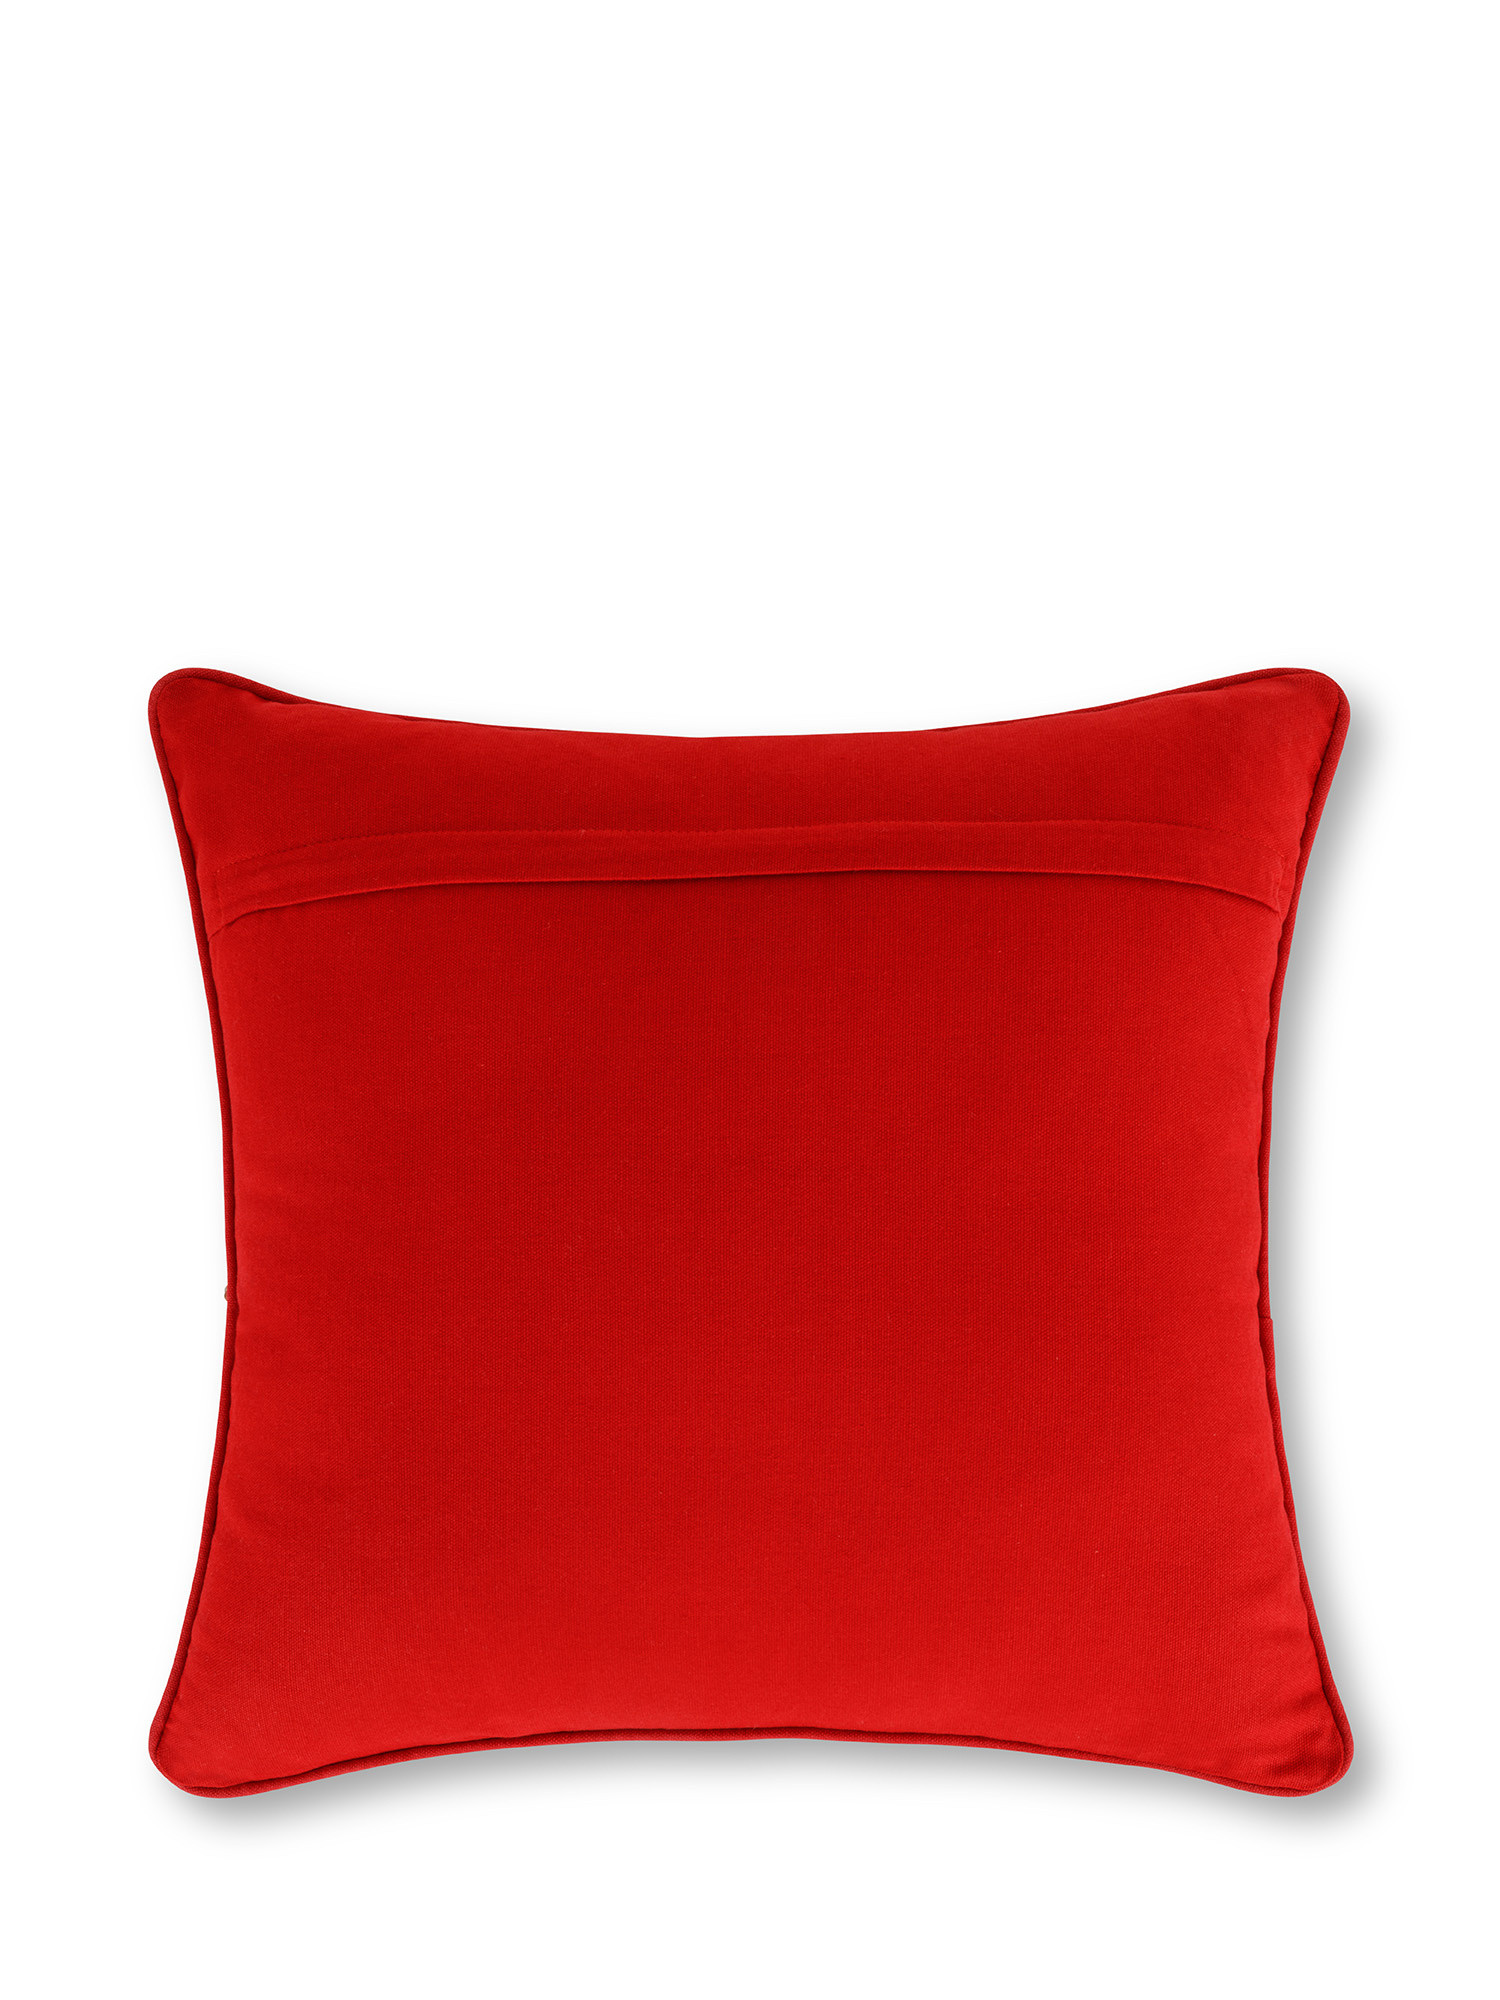 Velvet cushion with embossed fireworks embroidery 45x45 cm, Red, large image number 1